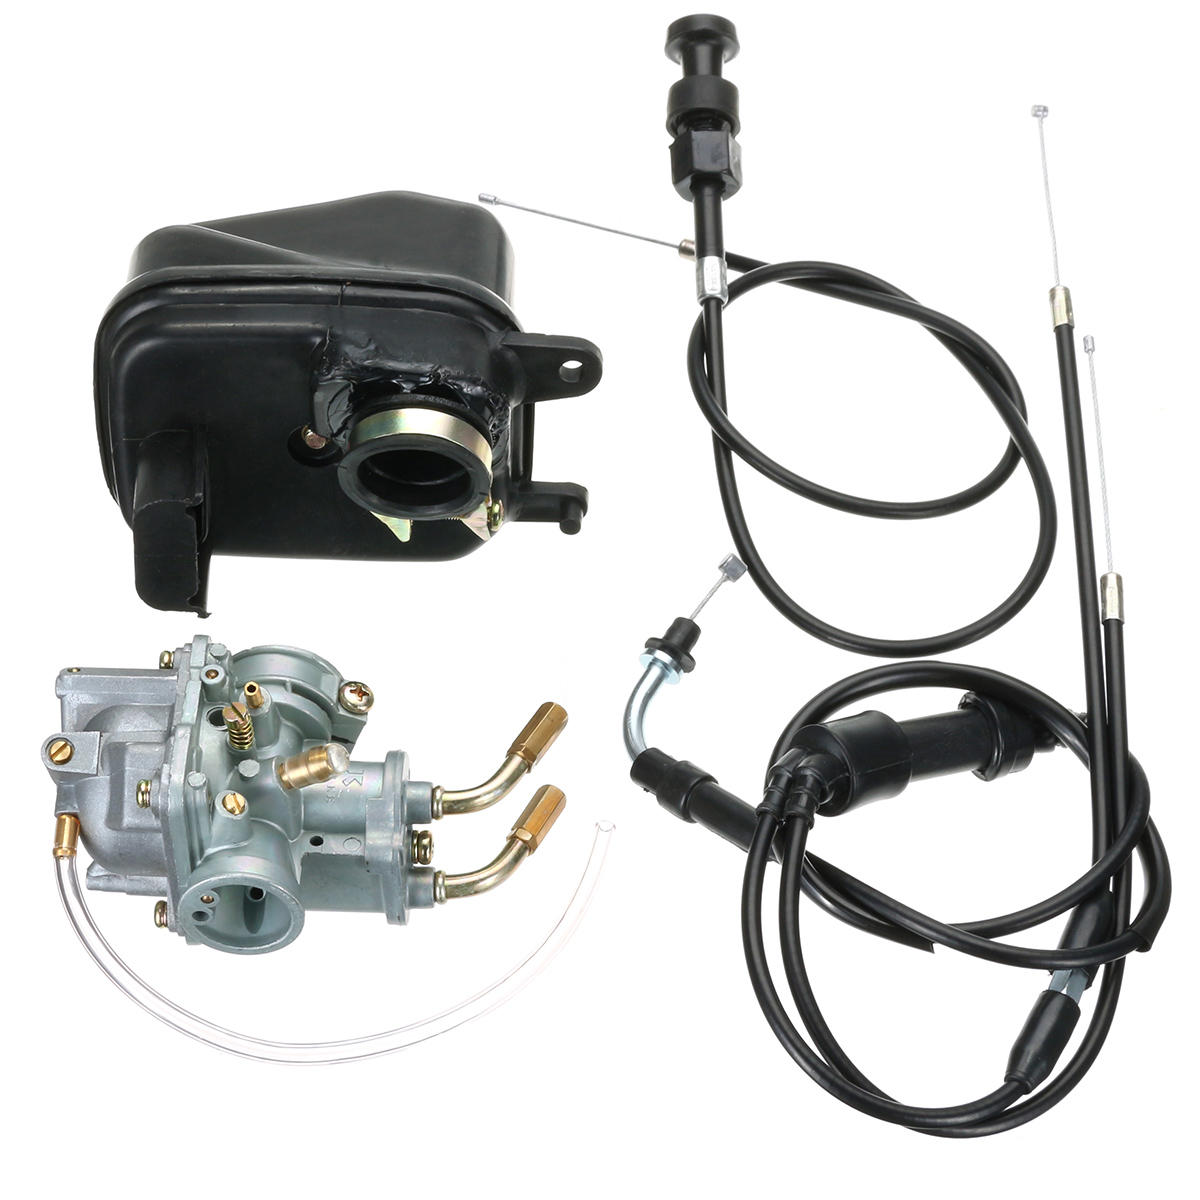 Carburateur Carby + Luchtfilter + Throttle + Choke-kabel voor YAMAHA PEEWEE YZinger PW50